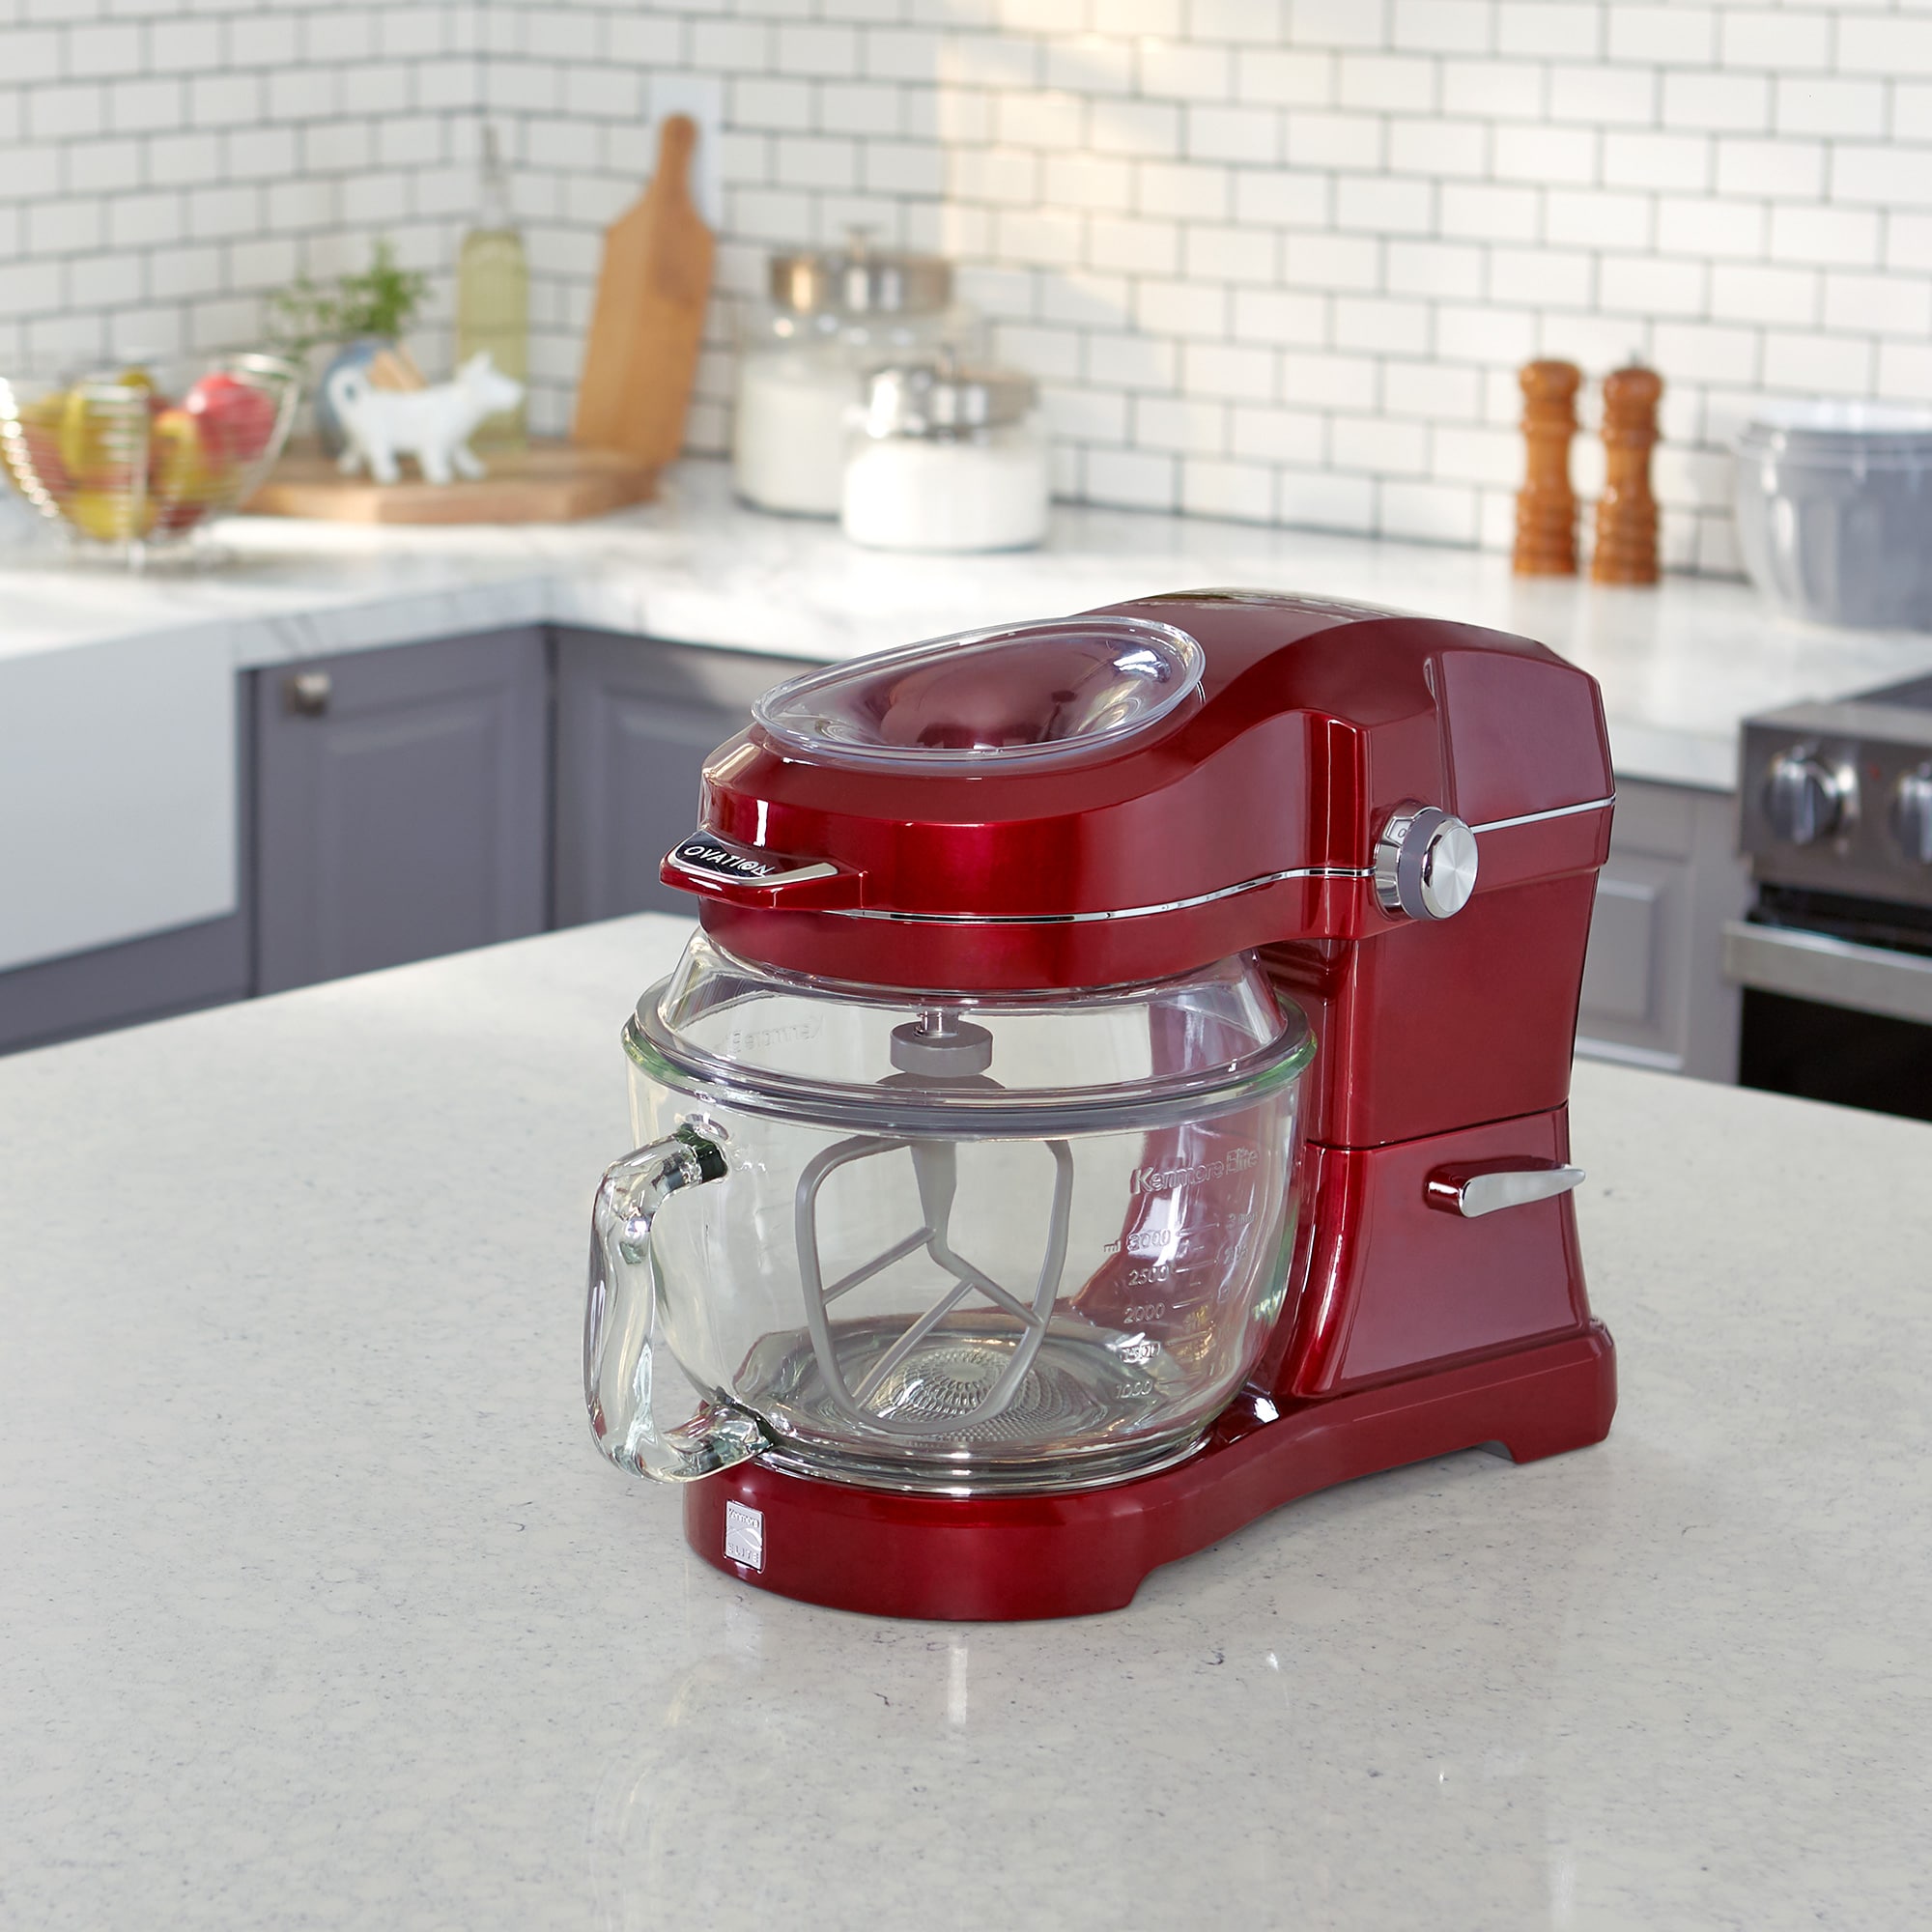 Kenmore Elite Ovation stand mixer review 